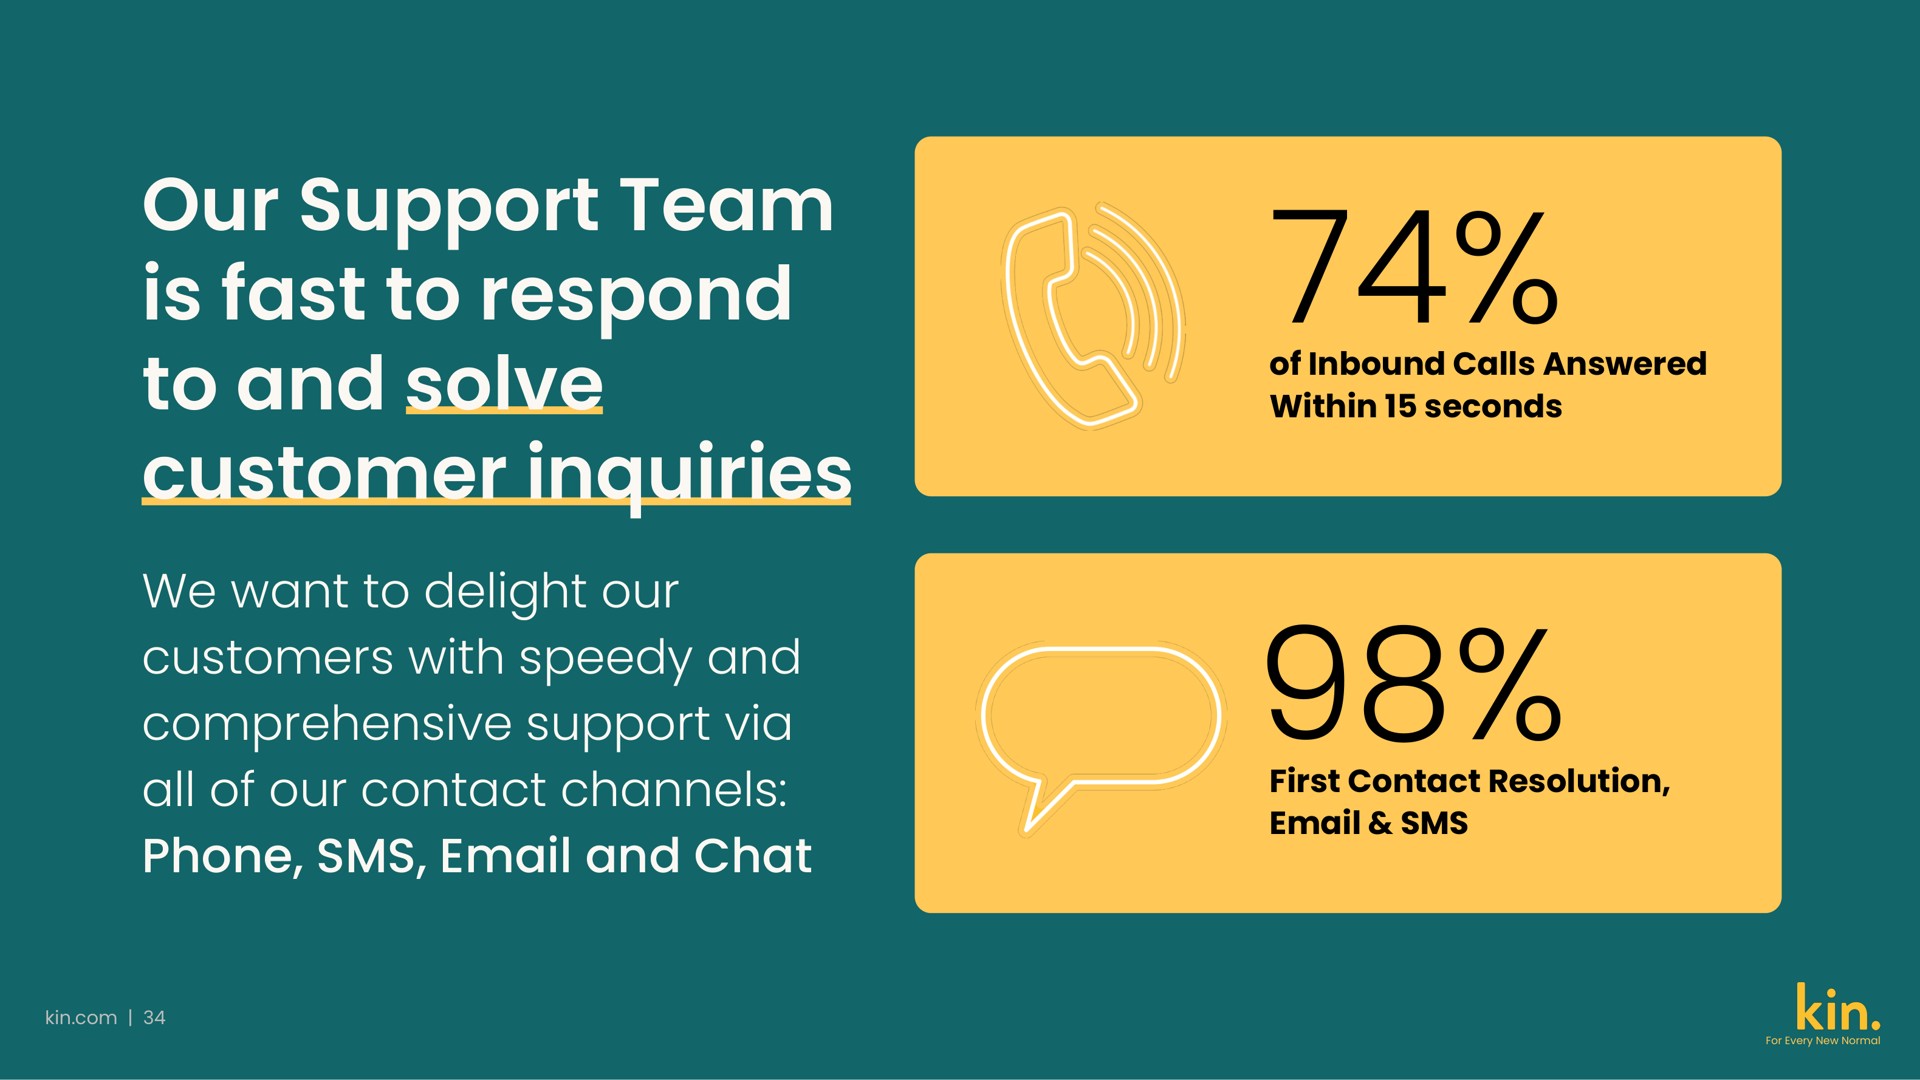 our support team is fast to respond to and solve customer inquiries we want delight customers with speedy comprehensive via all of contact channels phone chat first contact resolution | Kin